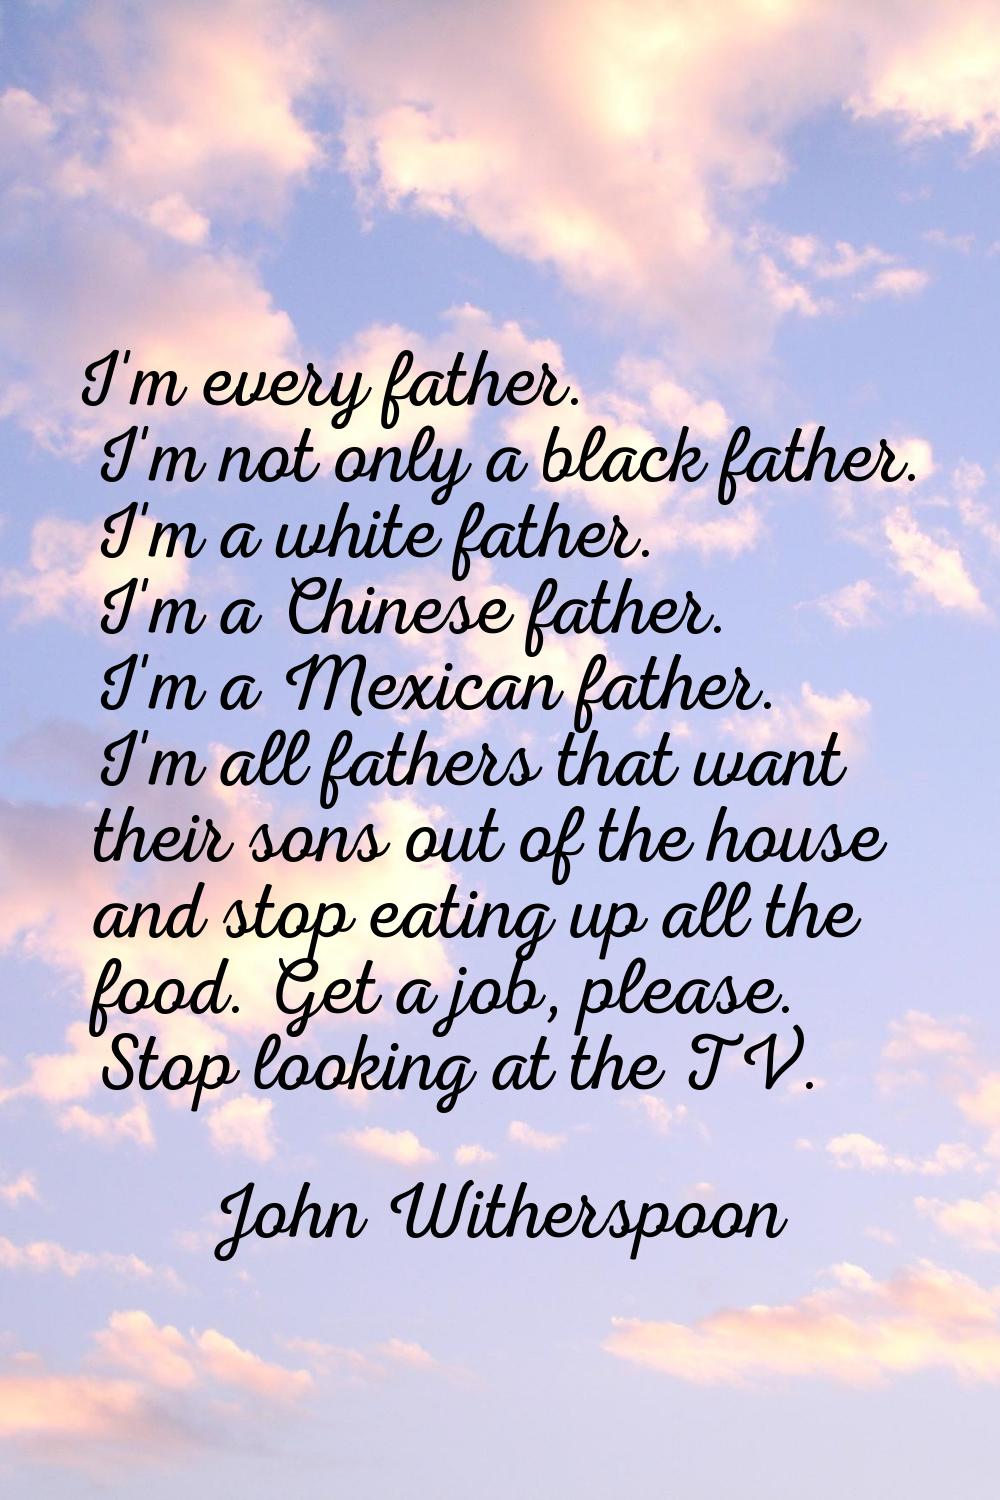 I'm every father. I'm not only a black father. I'm a white father. I'm a Chinese father. I'm a Mexi